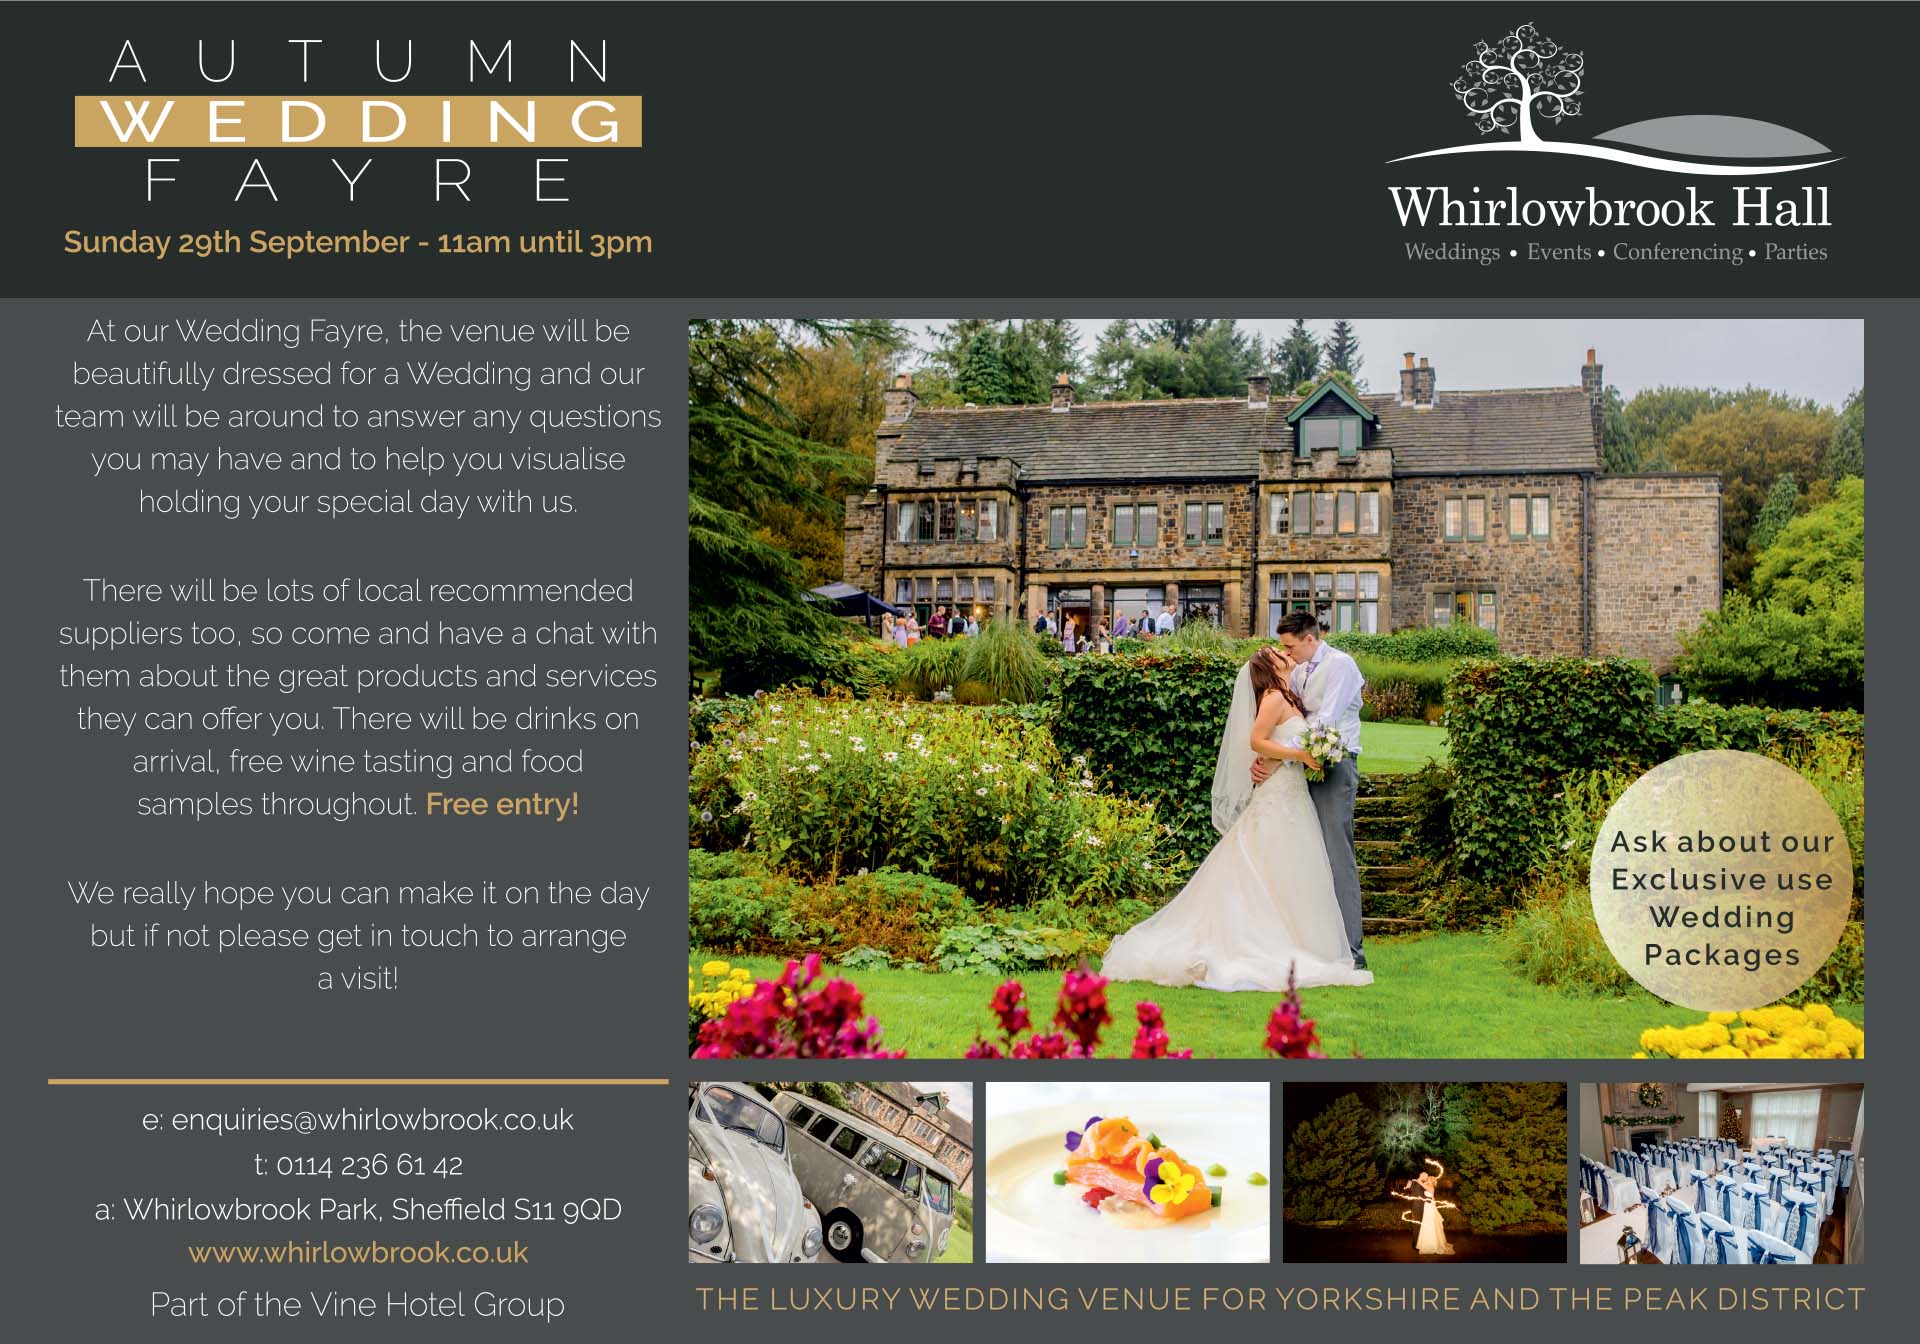 Luxury Party venues for Yorkshire and The Peak District Whirlowbrook Hall